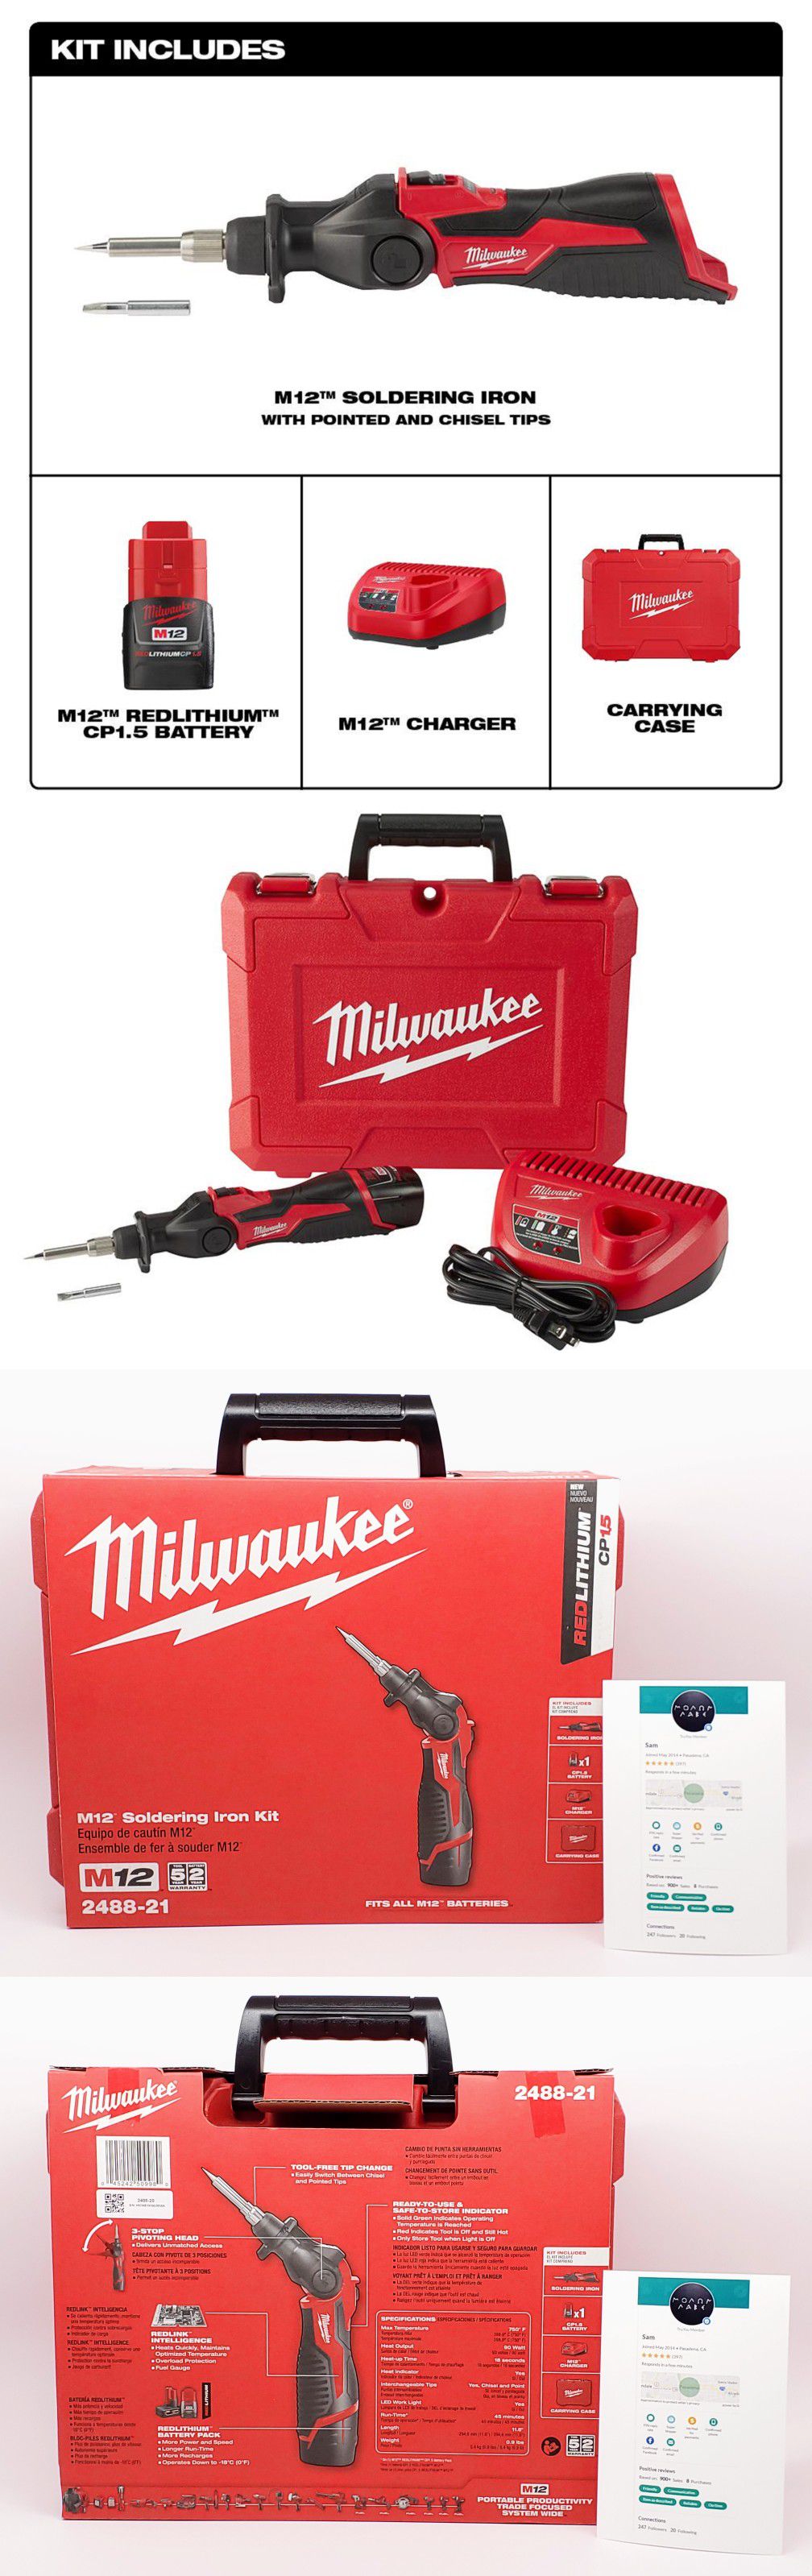 New Sealed Milwaukee M12 Cordless Soldering Iron Kit with Battery Charger & Hard Case 2488-21